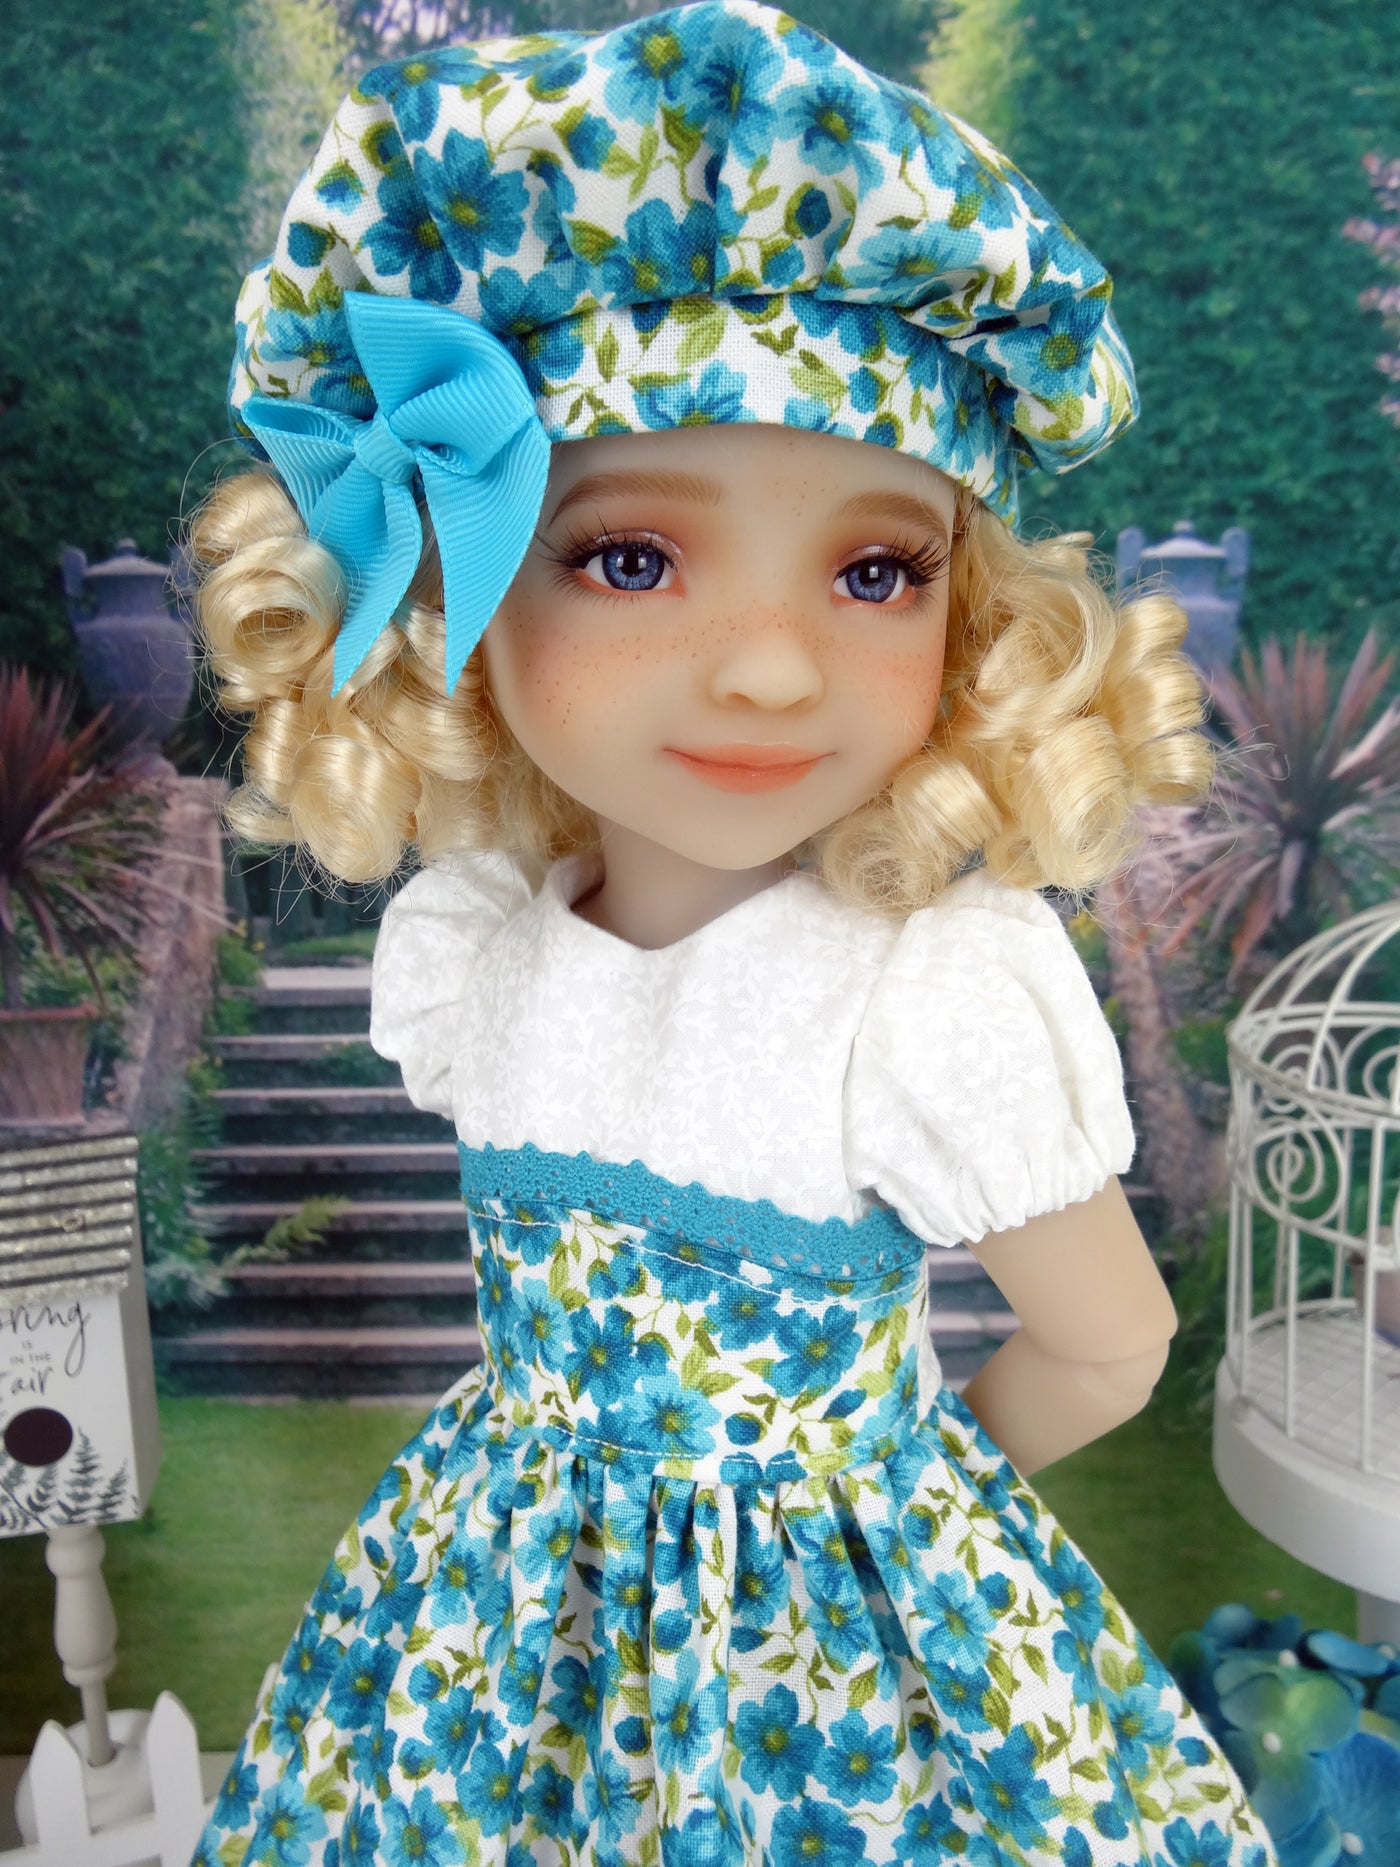 Turquoise in Spring - dress and shoes for Ruby Red Fashion Friends doll